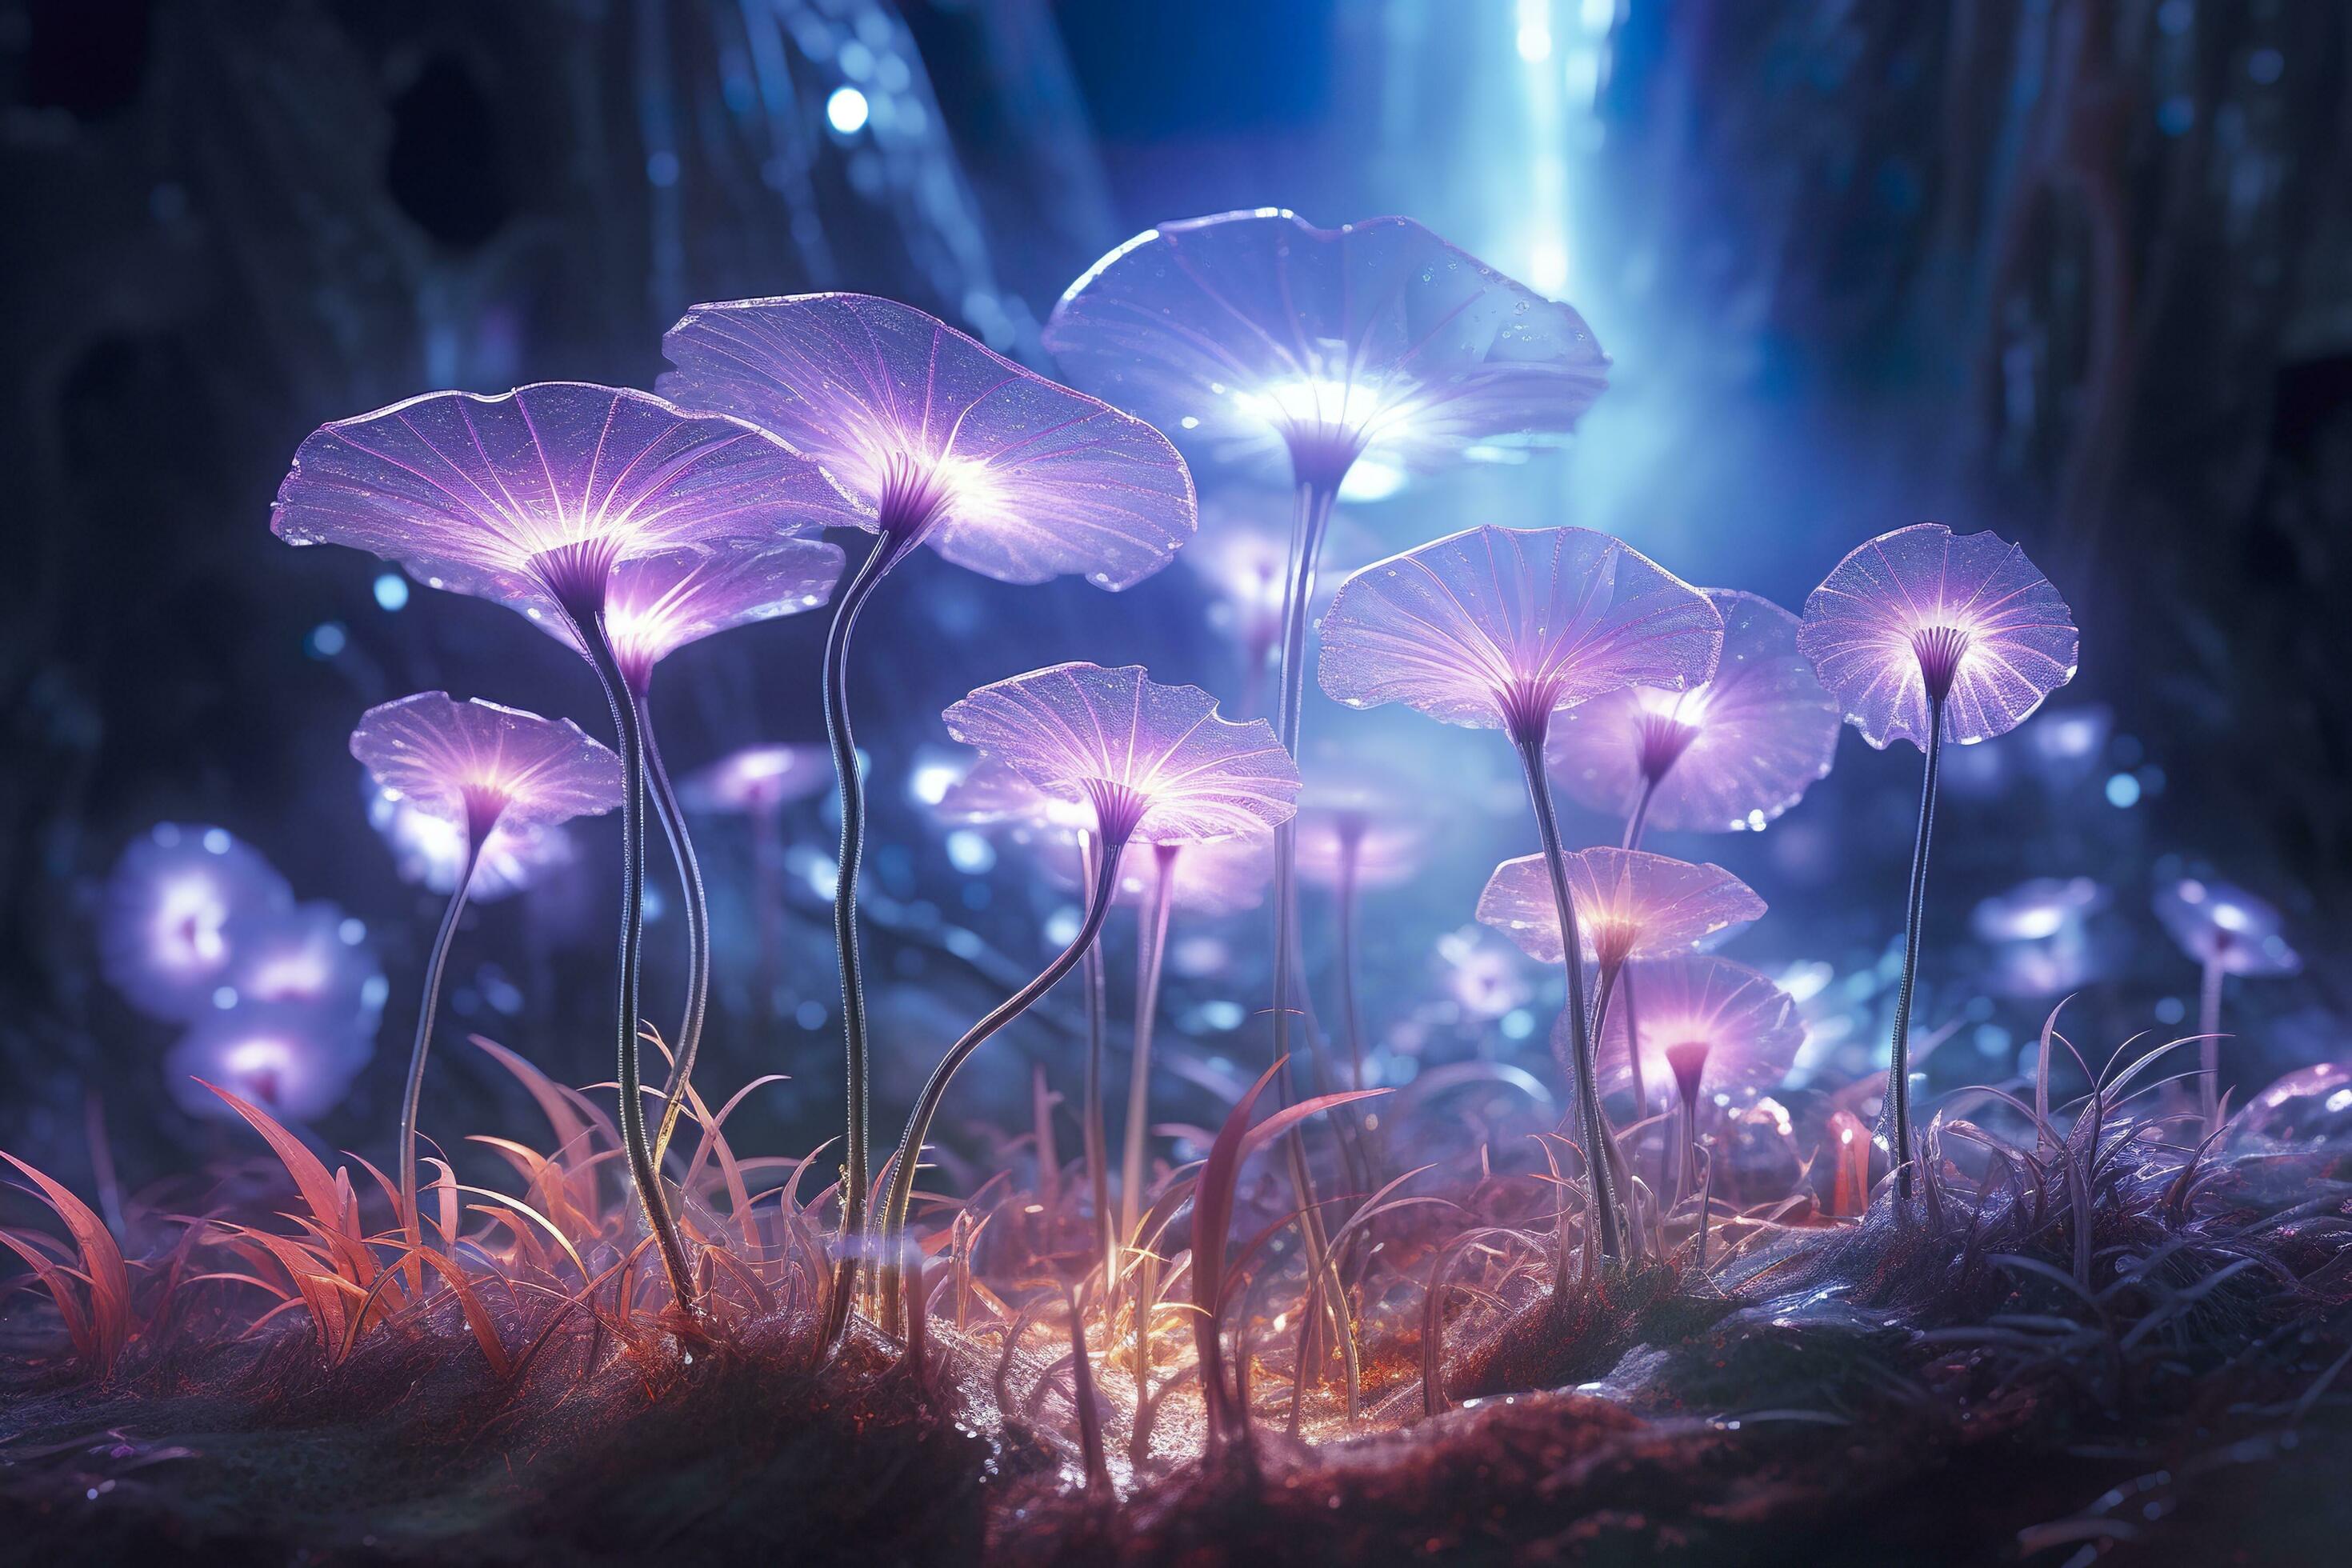 A Bioluminescent Alien Crystal Forest